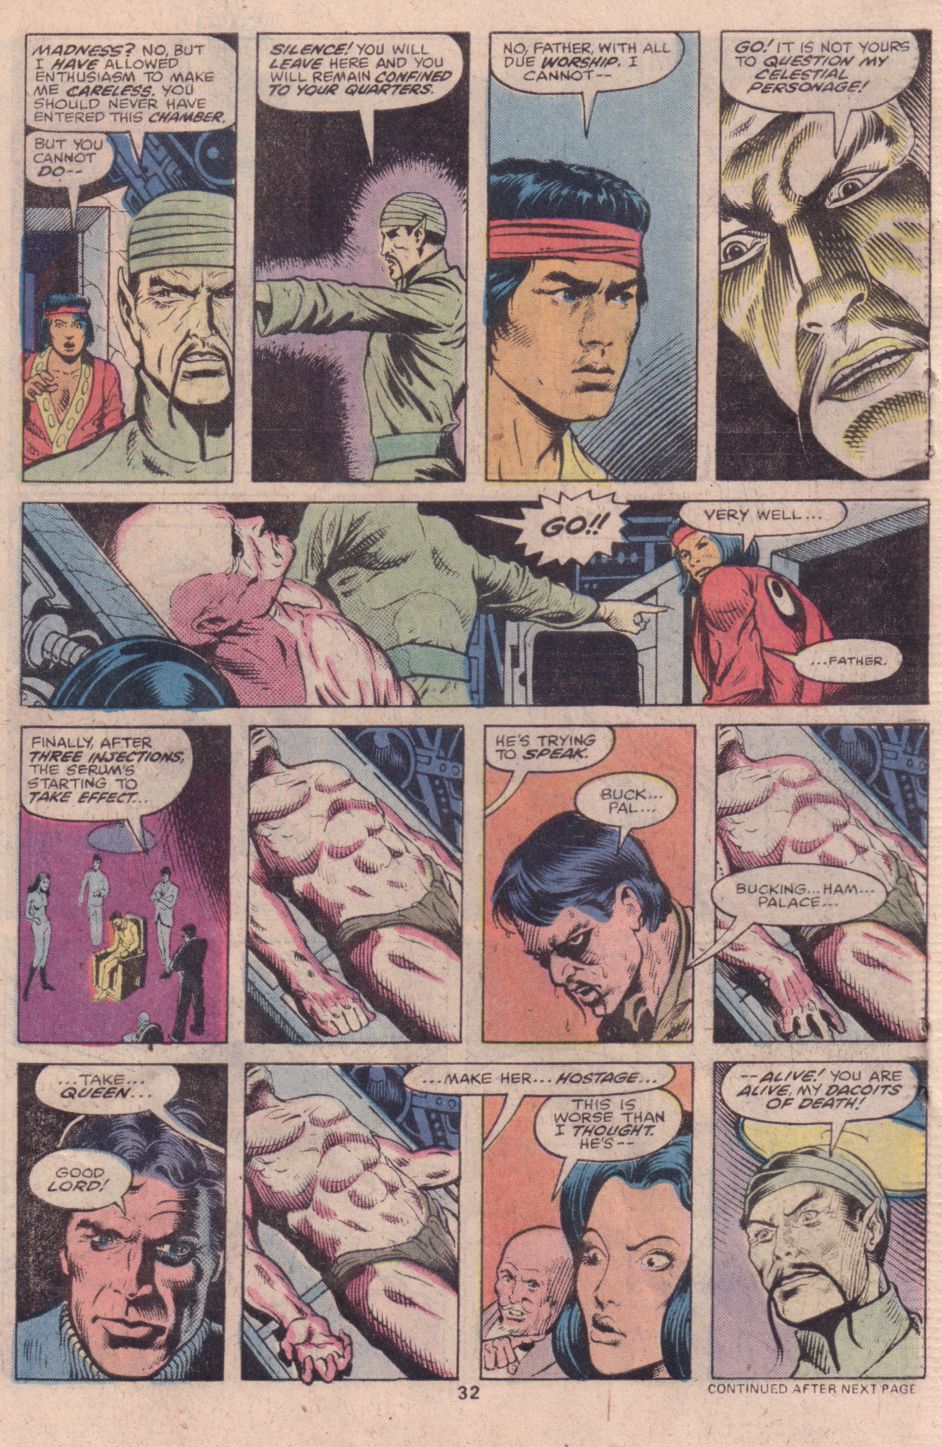 What If? (1977) issue 16 - Shang Chi Master of Kung Fu fought on The side of Fu Manchu - Page 25